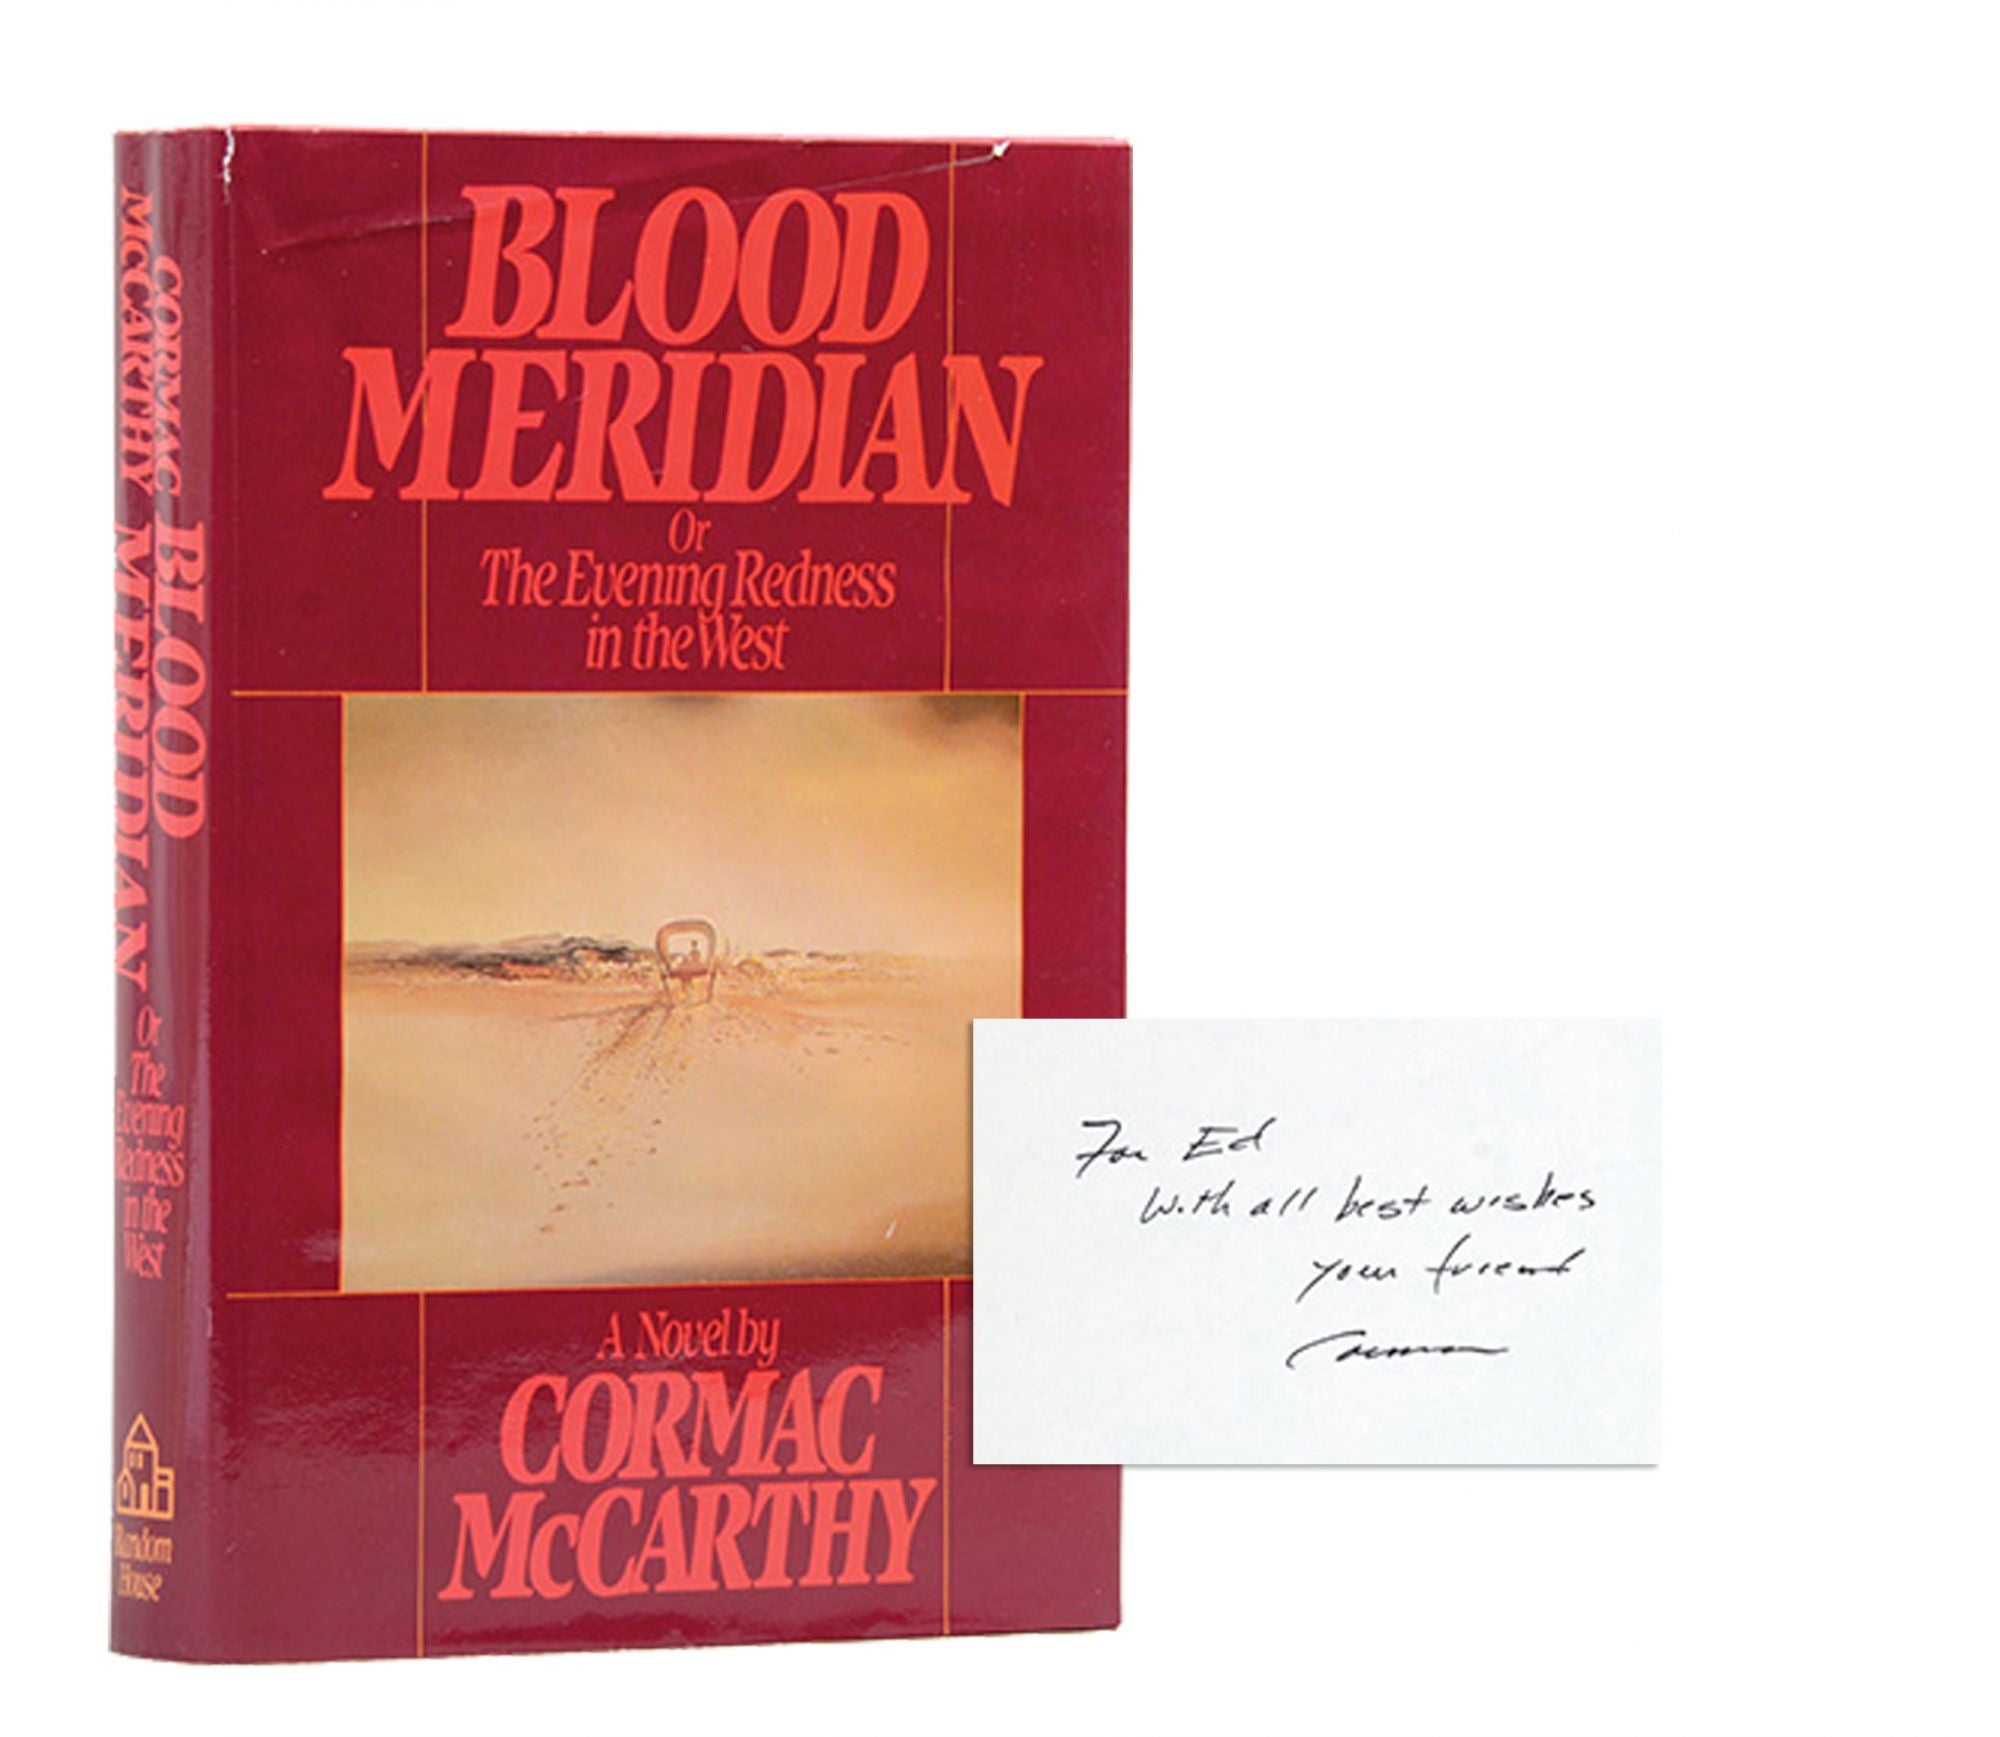 Blood Meridian or The Evening Redness in the